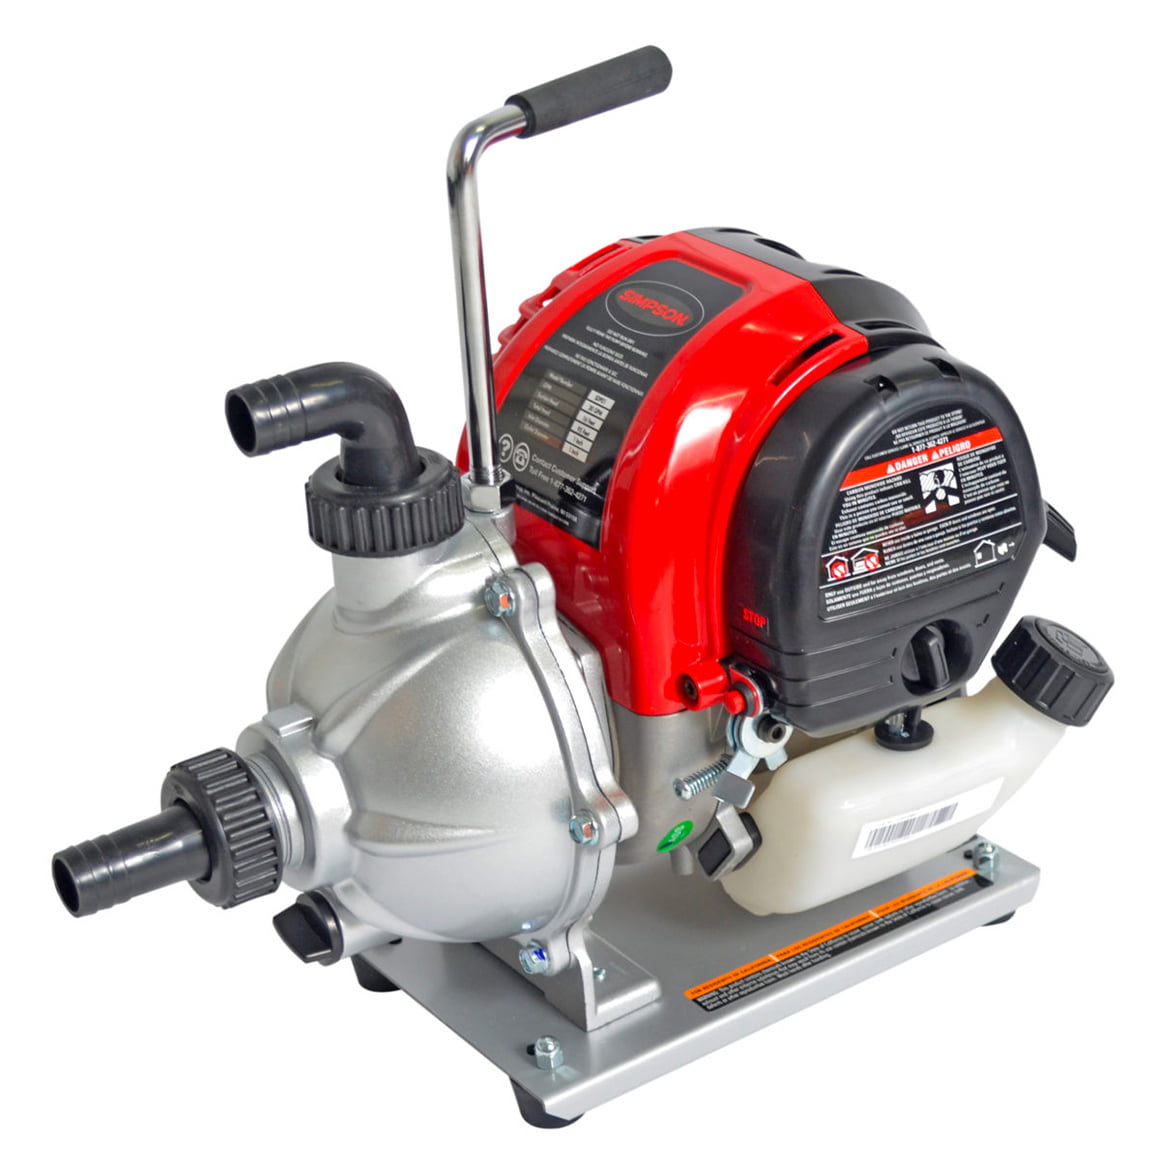 Simpson SDP01 Compact Dewatering Pump 1" With Hoses 